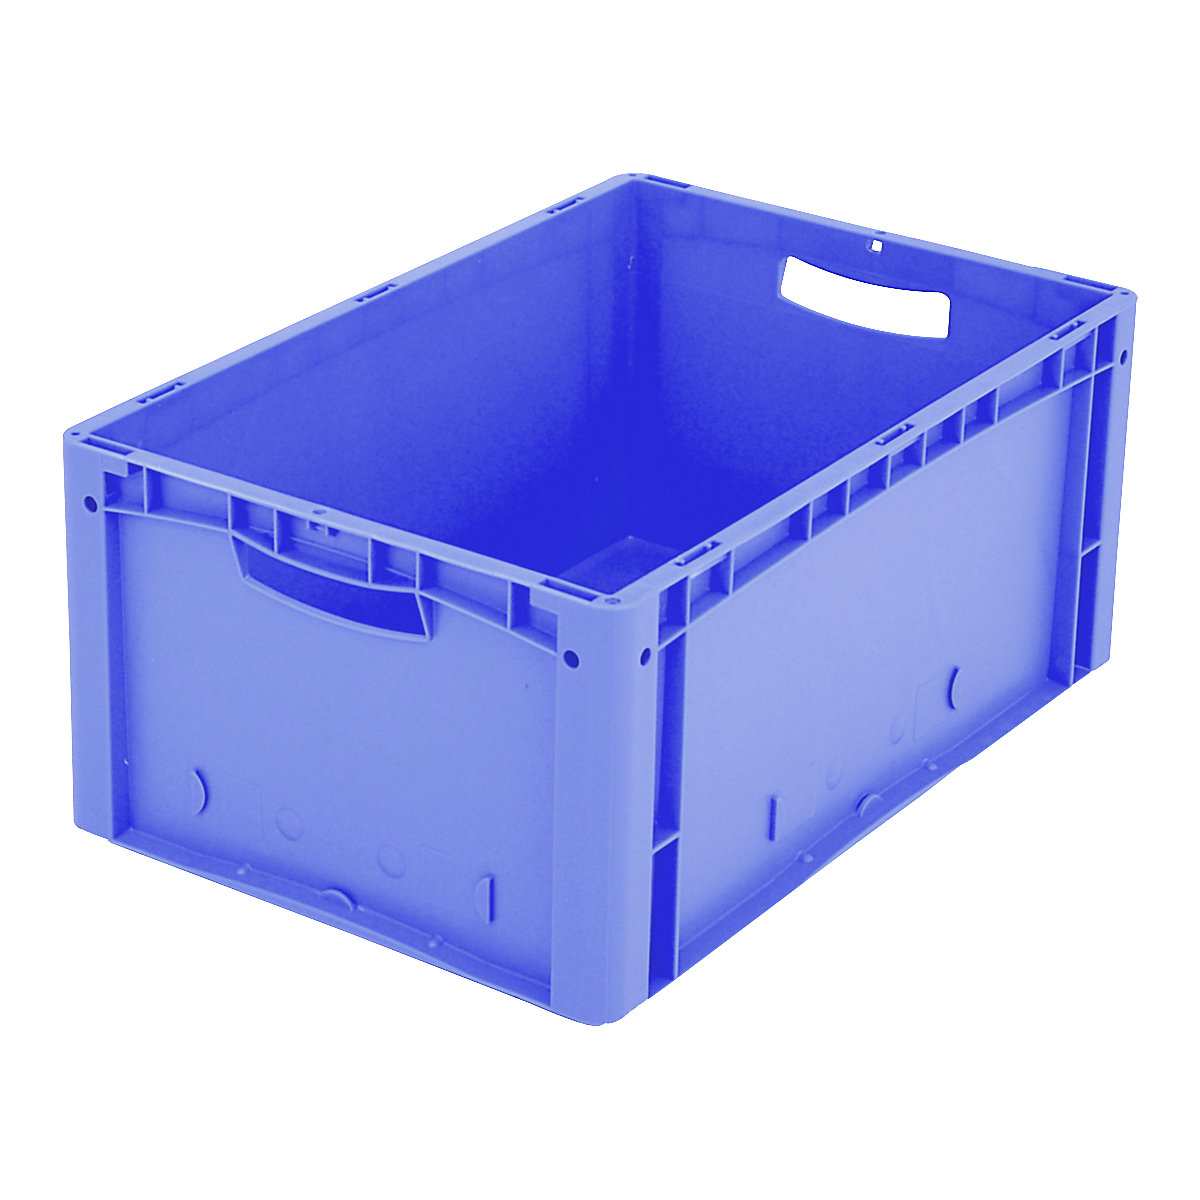 XL Euro stacking container – BITO, standard model, LxWxH 600 x 400 x 270 mm-15